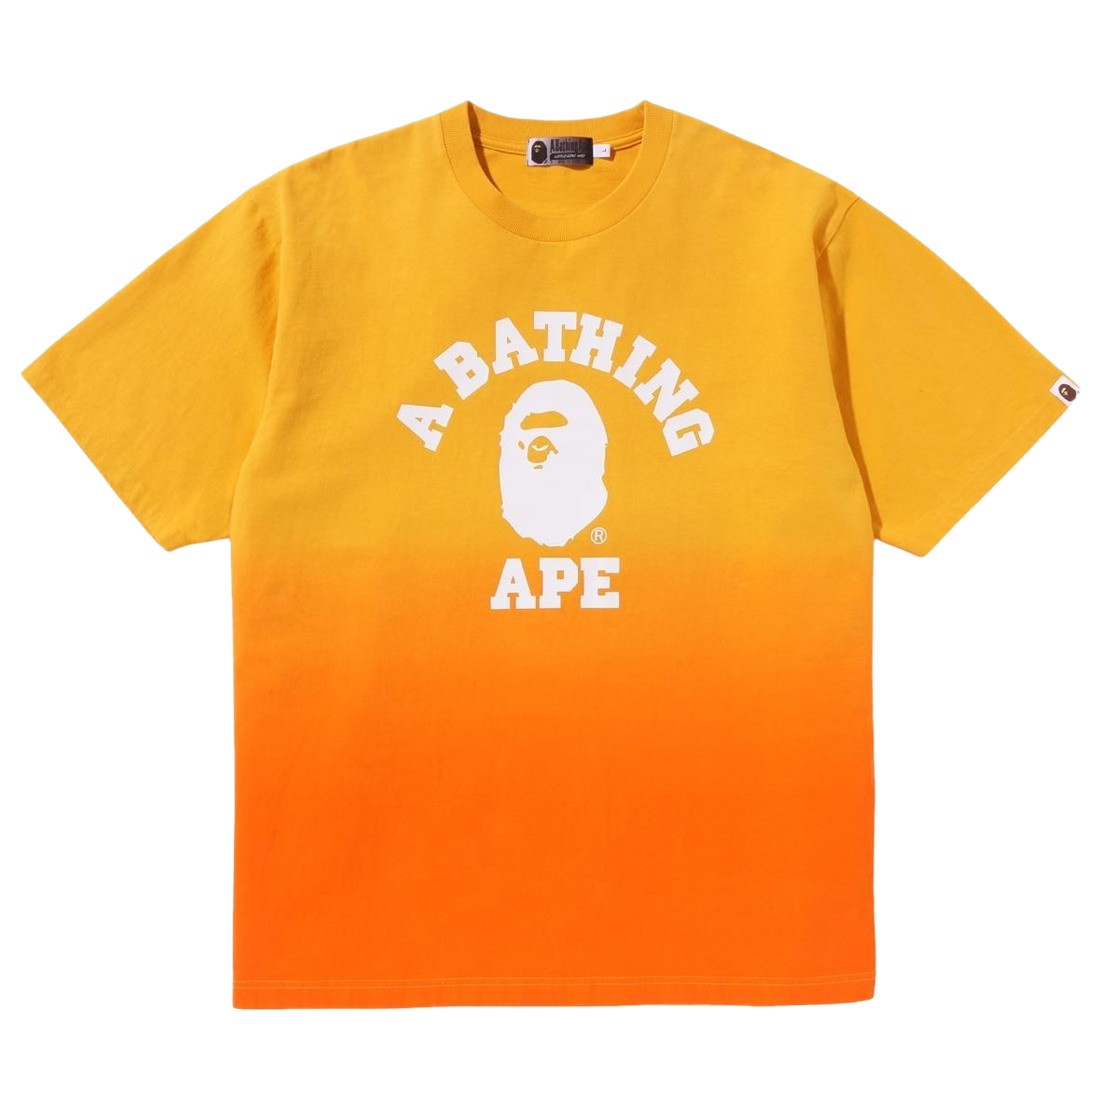 Relaxed Fit T-shirt - Yellow - Men